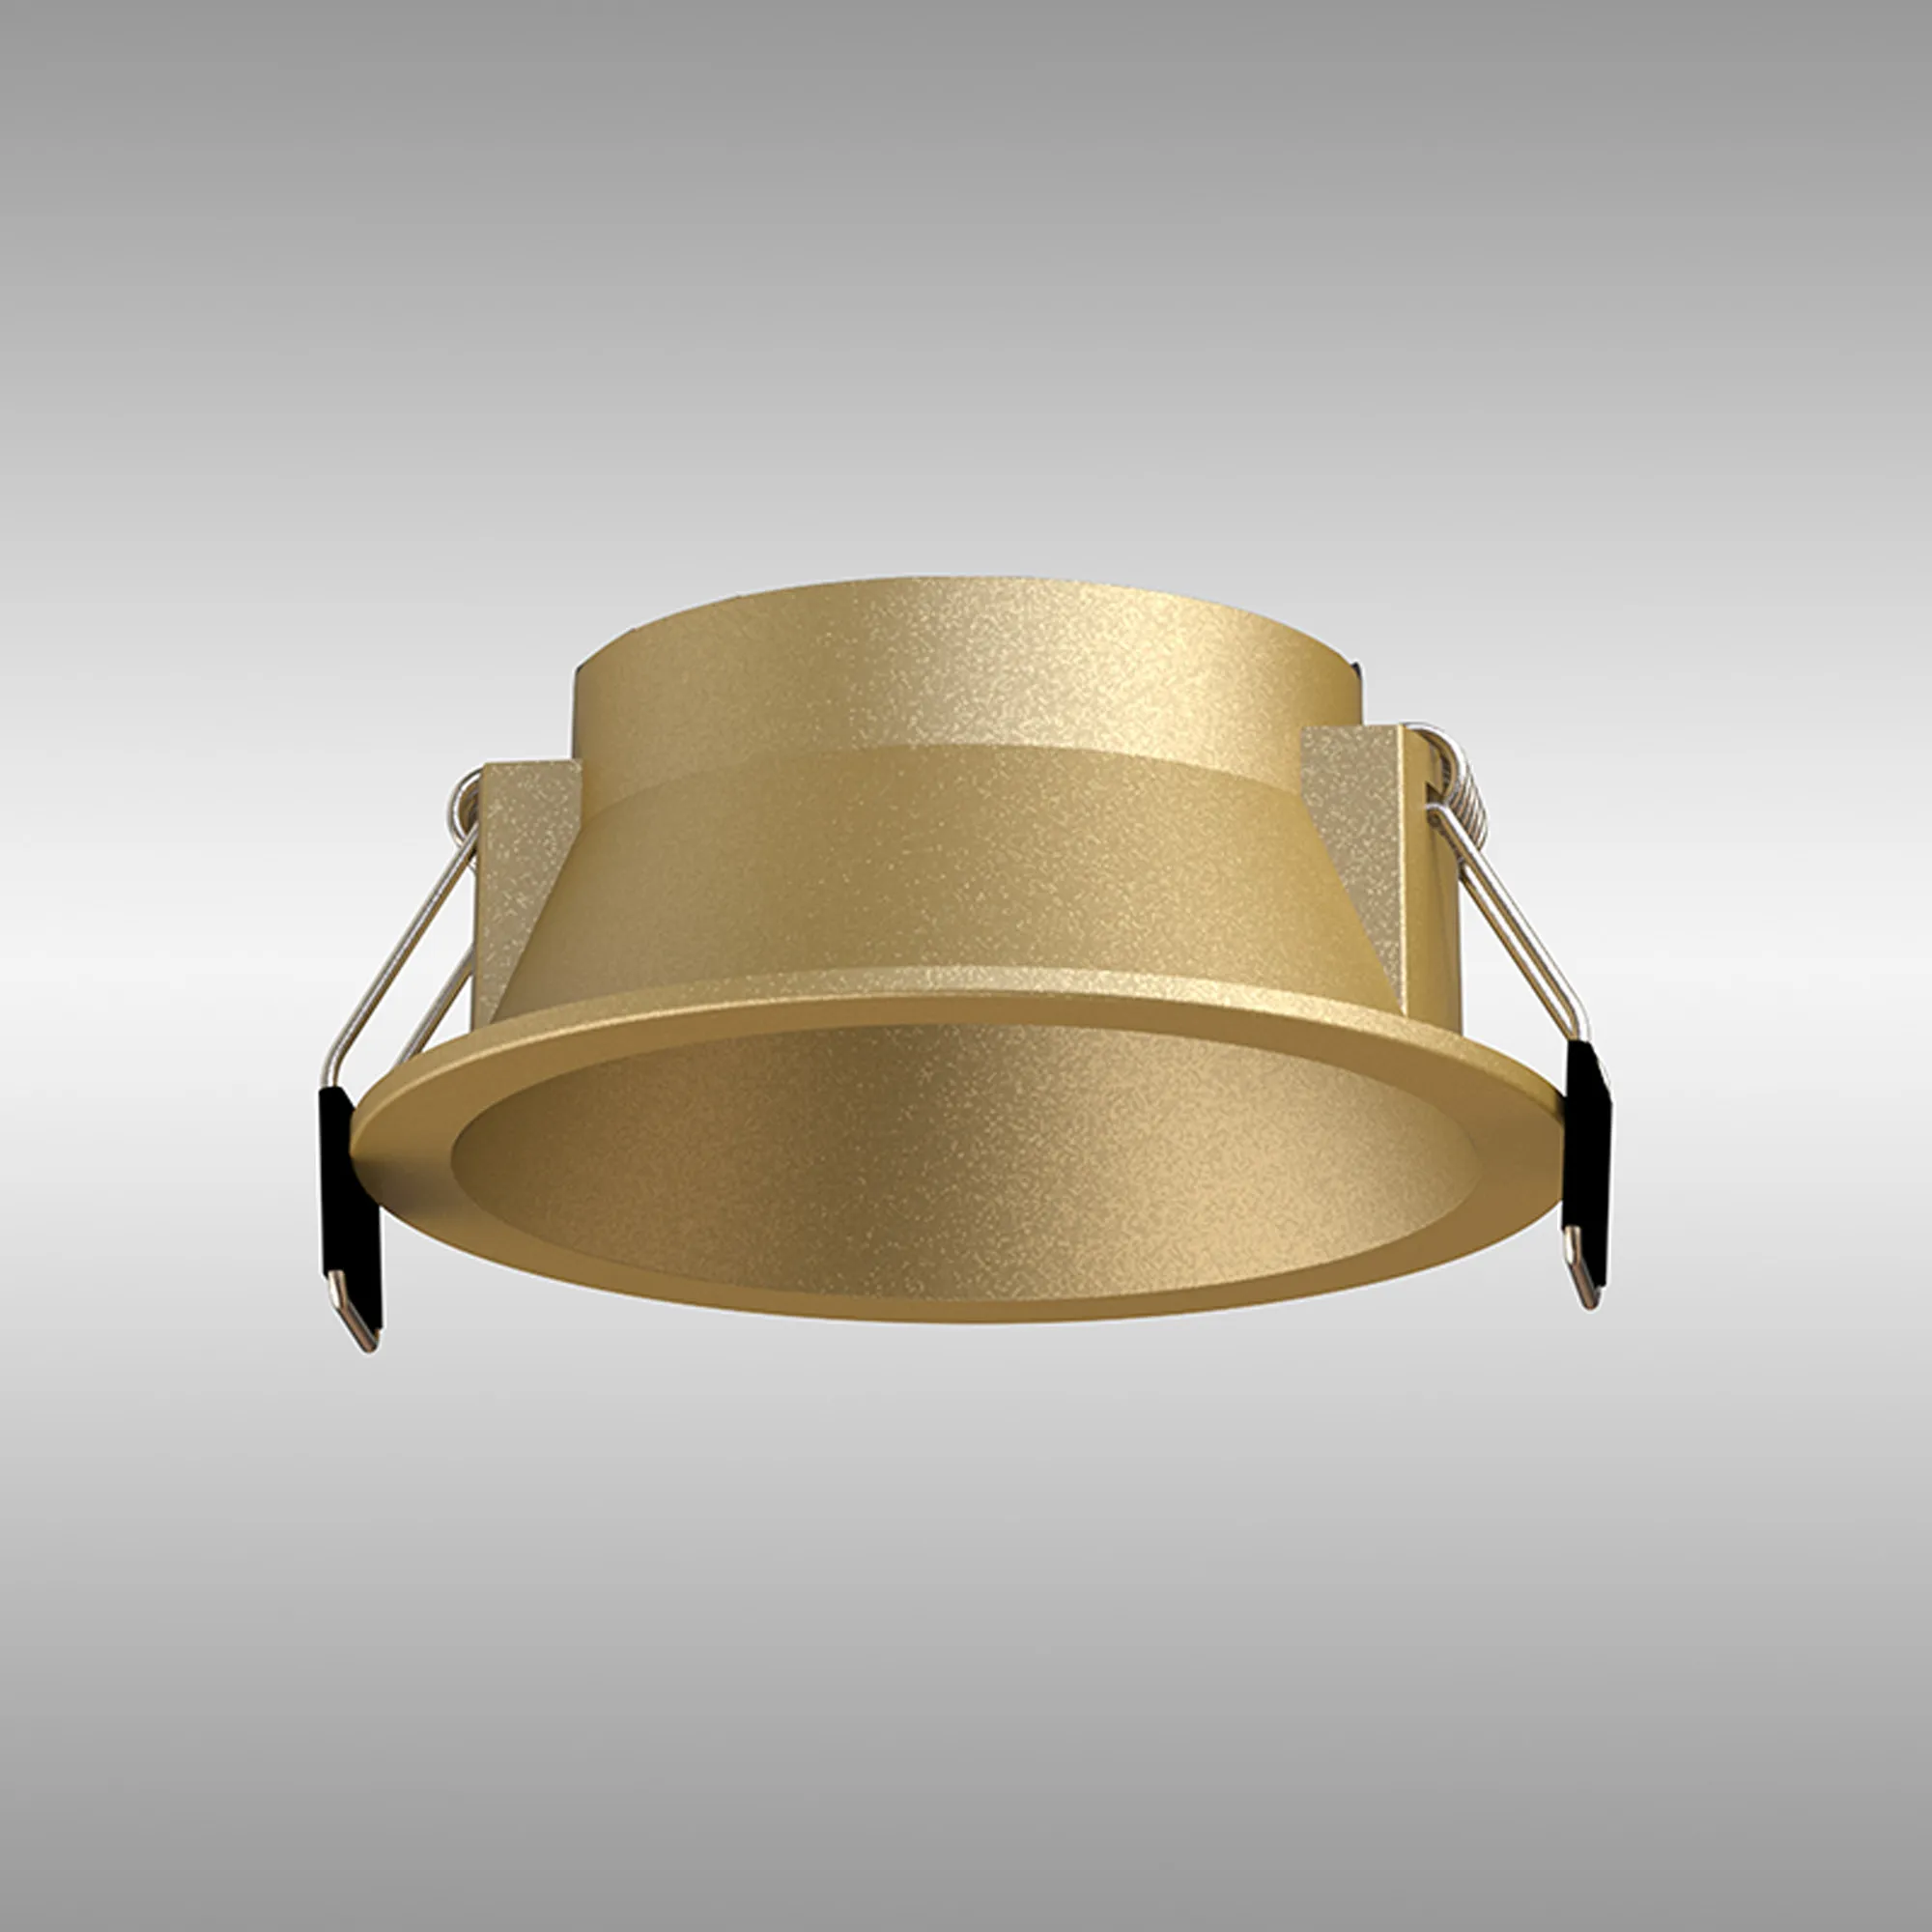 M8779  Sunset 85 x 87mm Recessed Base; Cut Out: 75mm; Gold